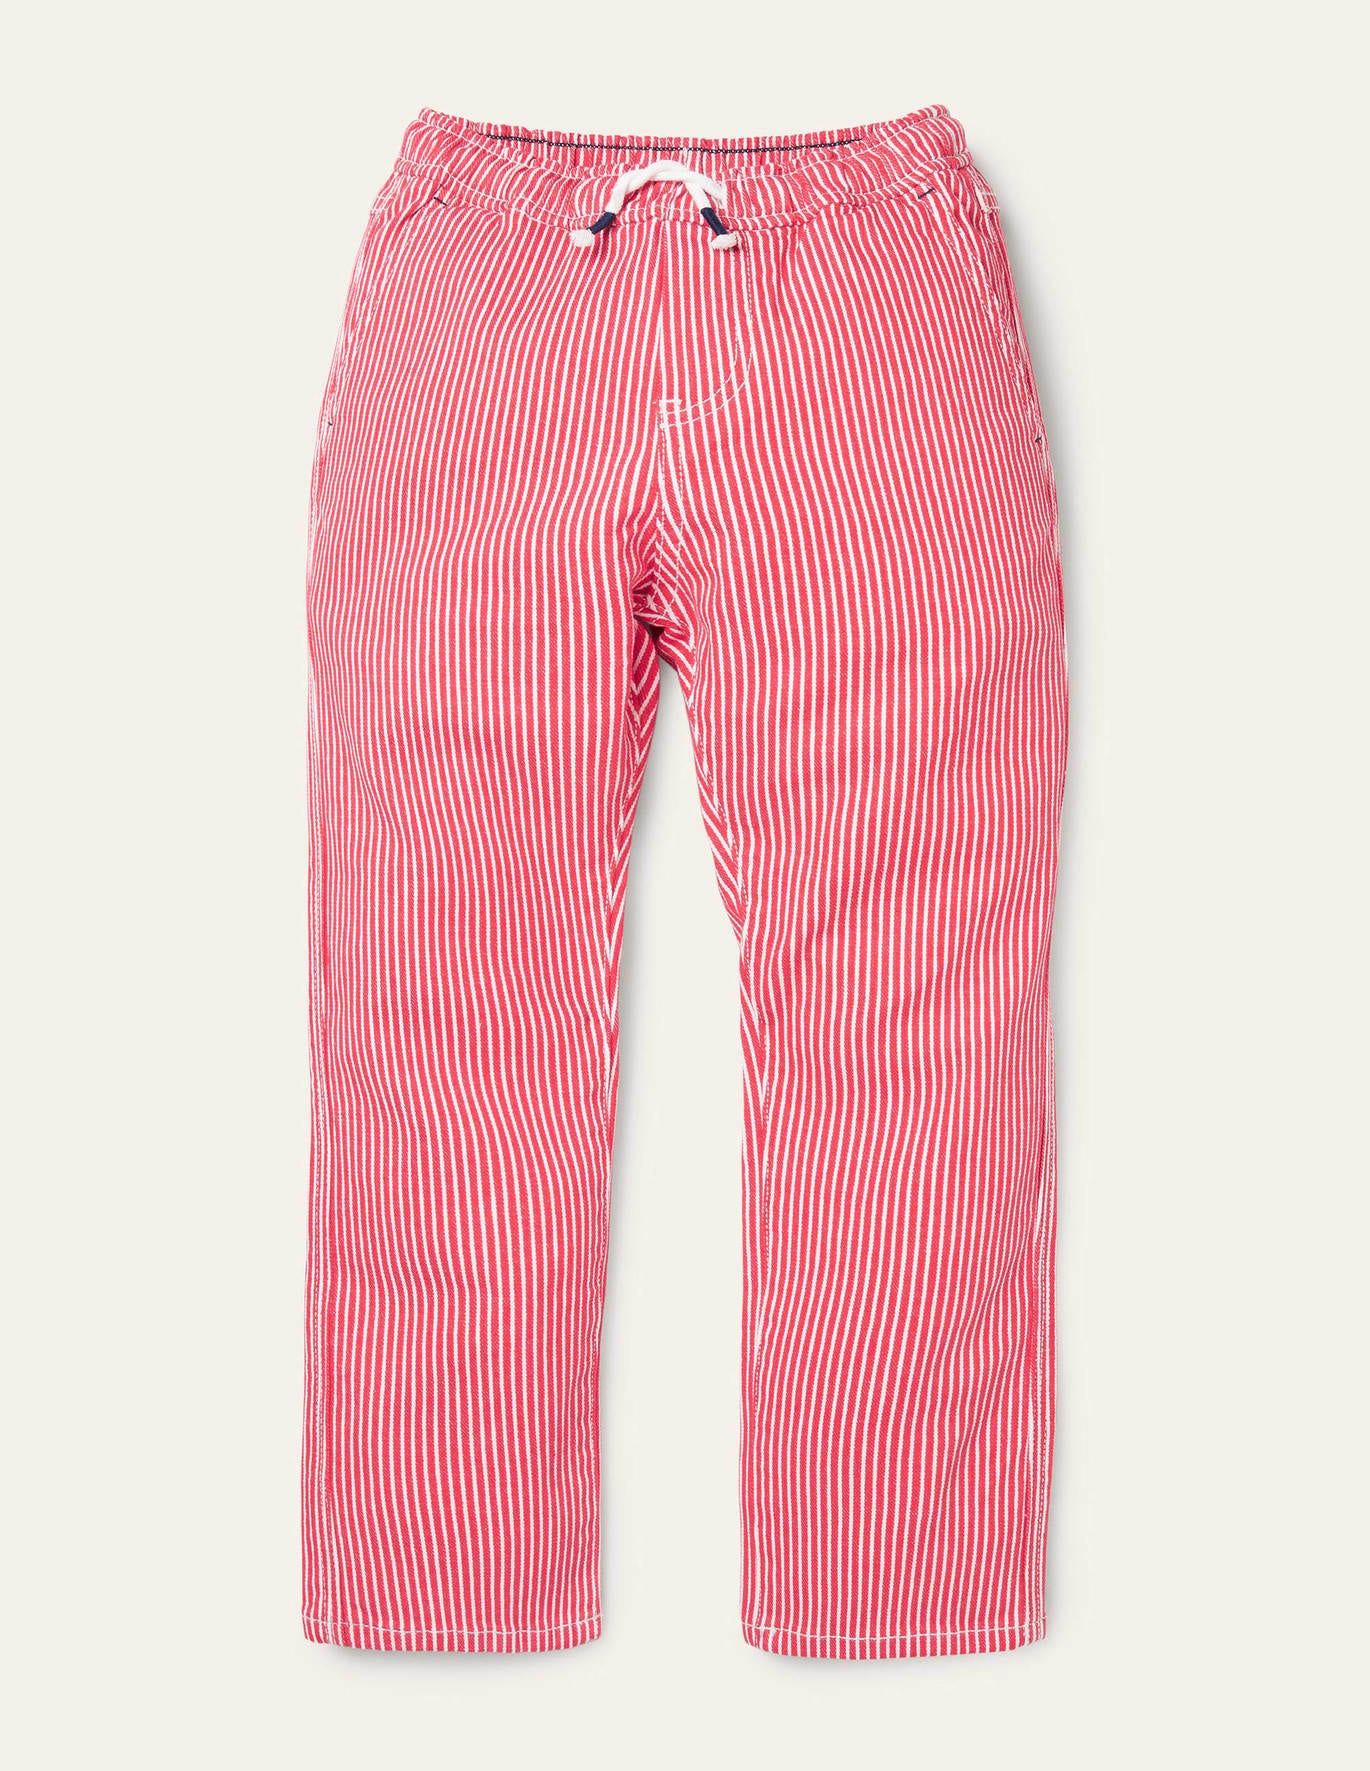 Boden Relaxed Slim Pull-on Pants - Strawberry Tart Red Ticking